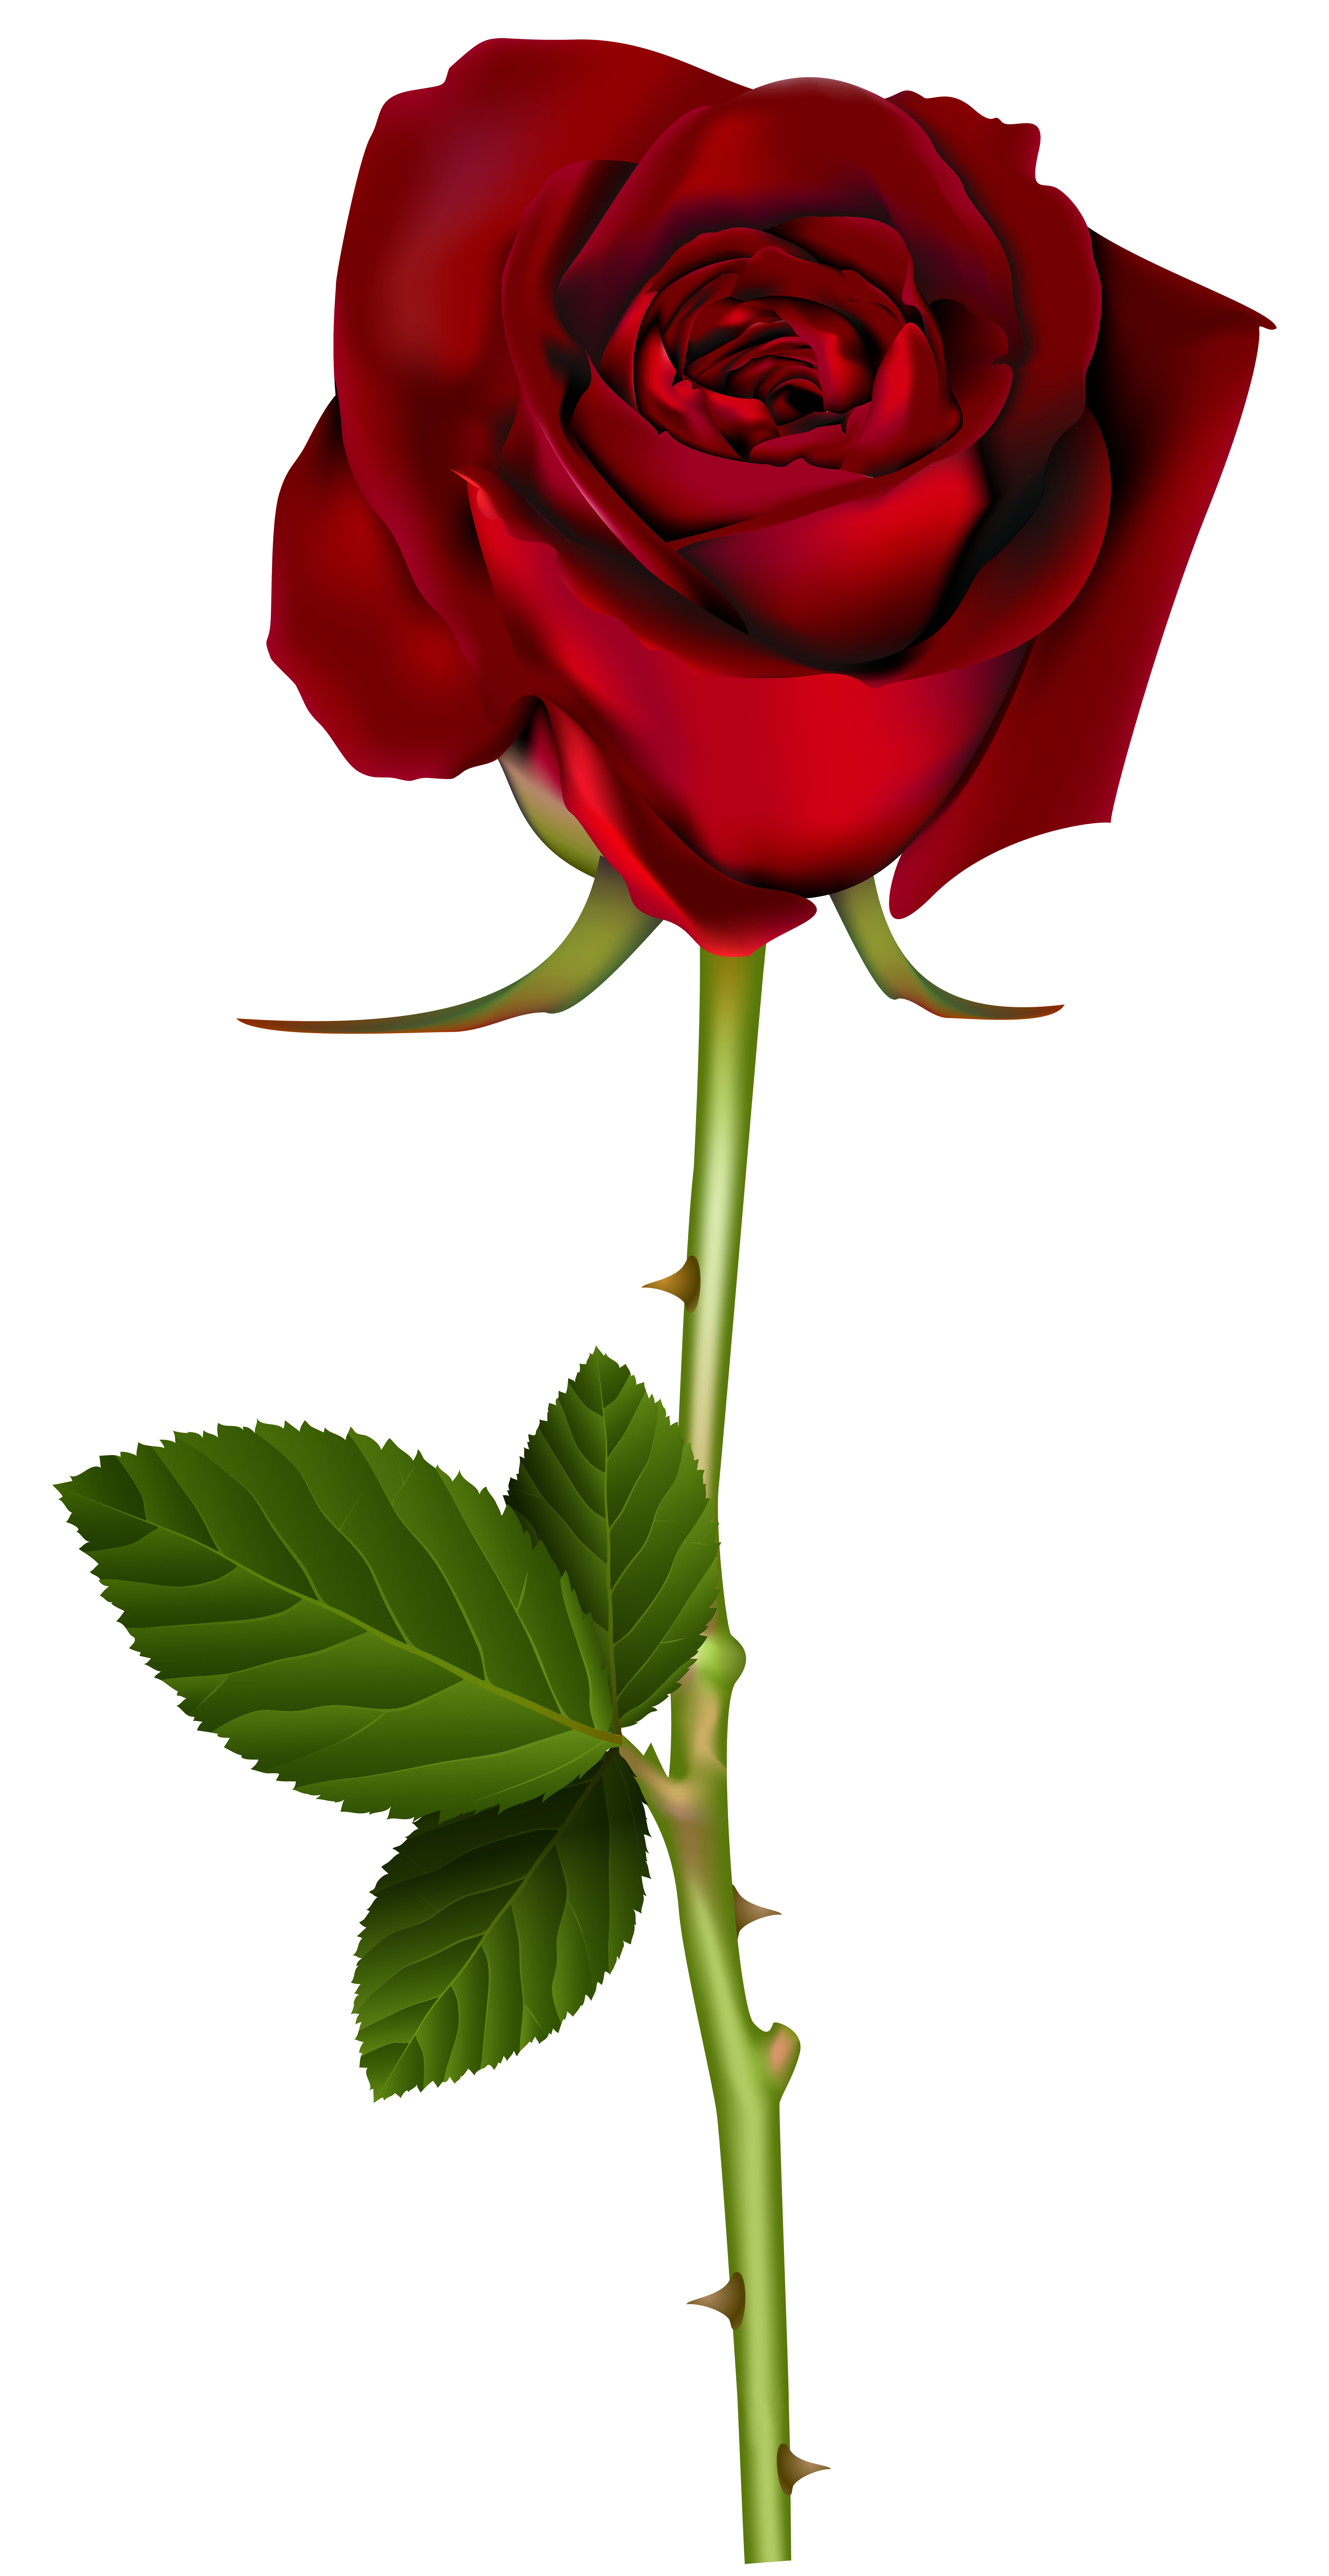 Clipart rose high resolution. Red png transparent image